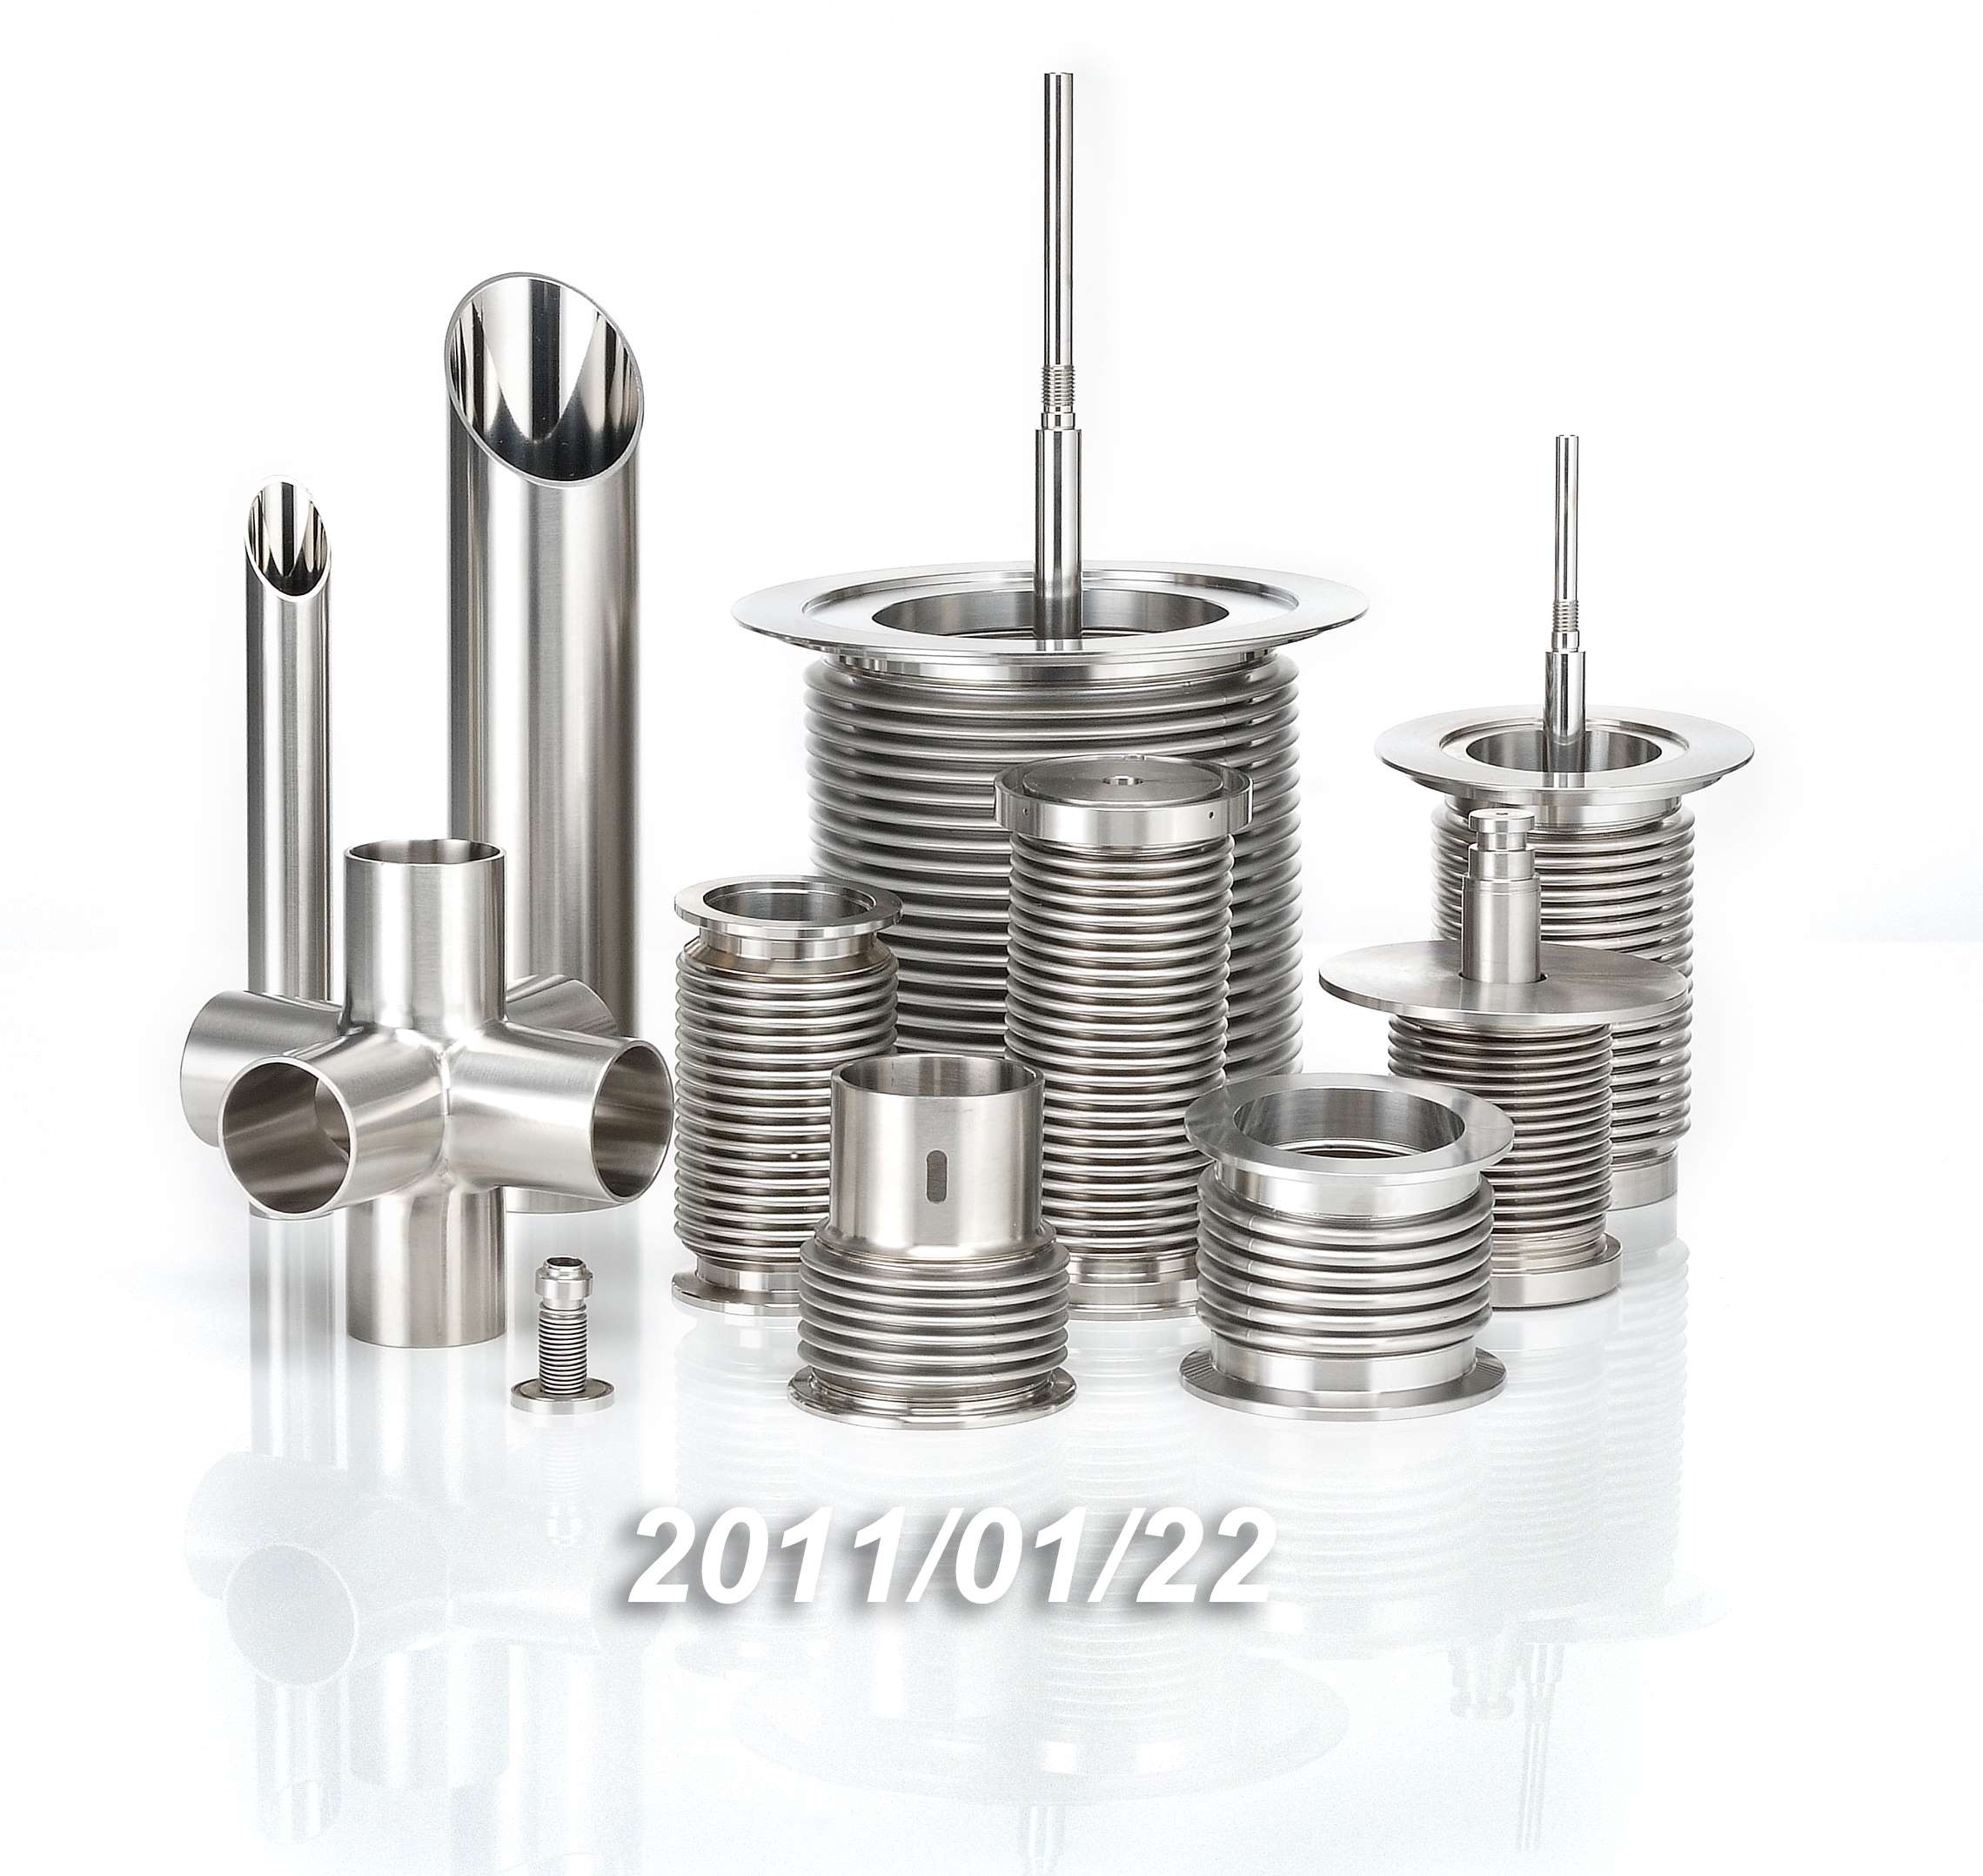 Qualified Stainless Steel Manufacturer and Supplier